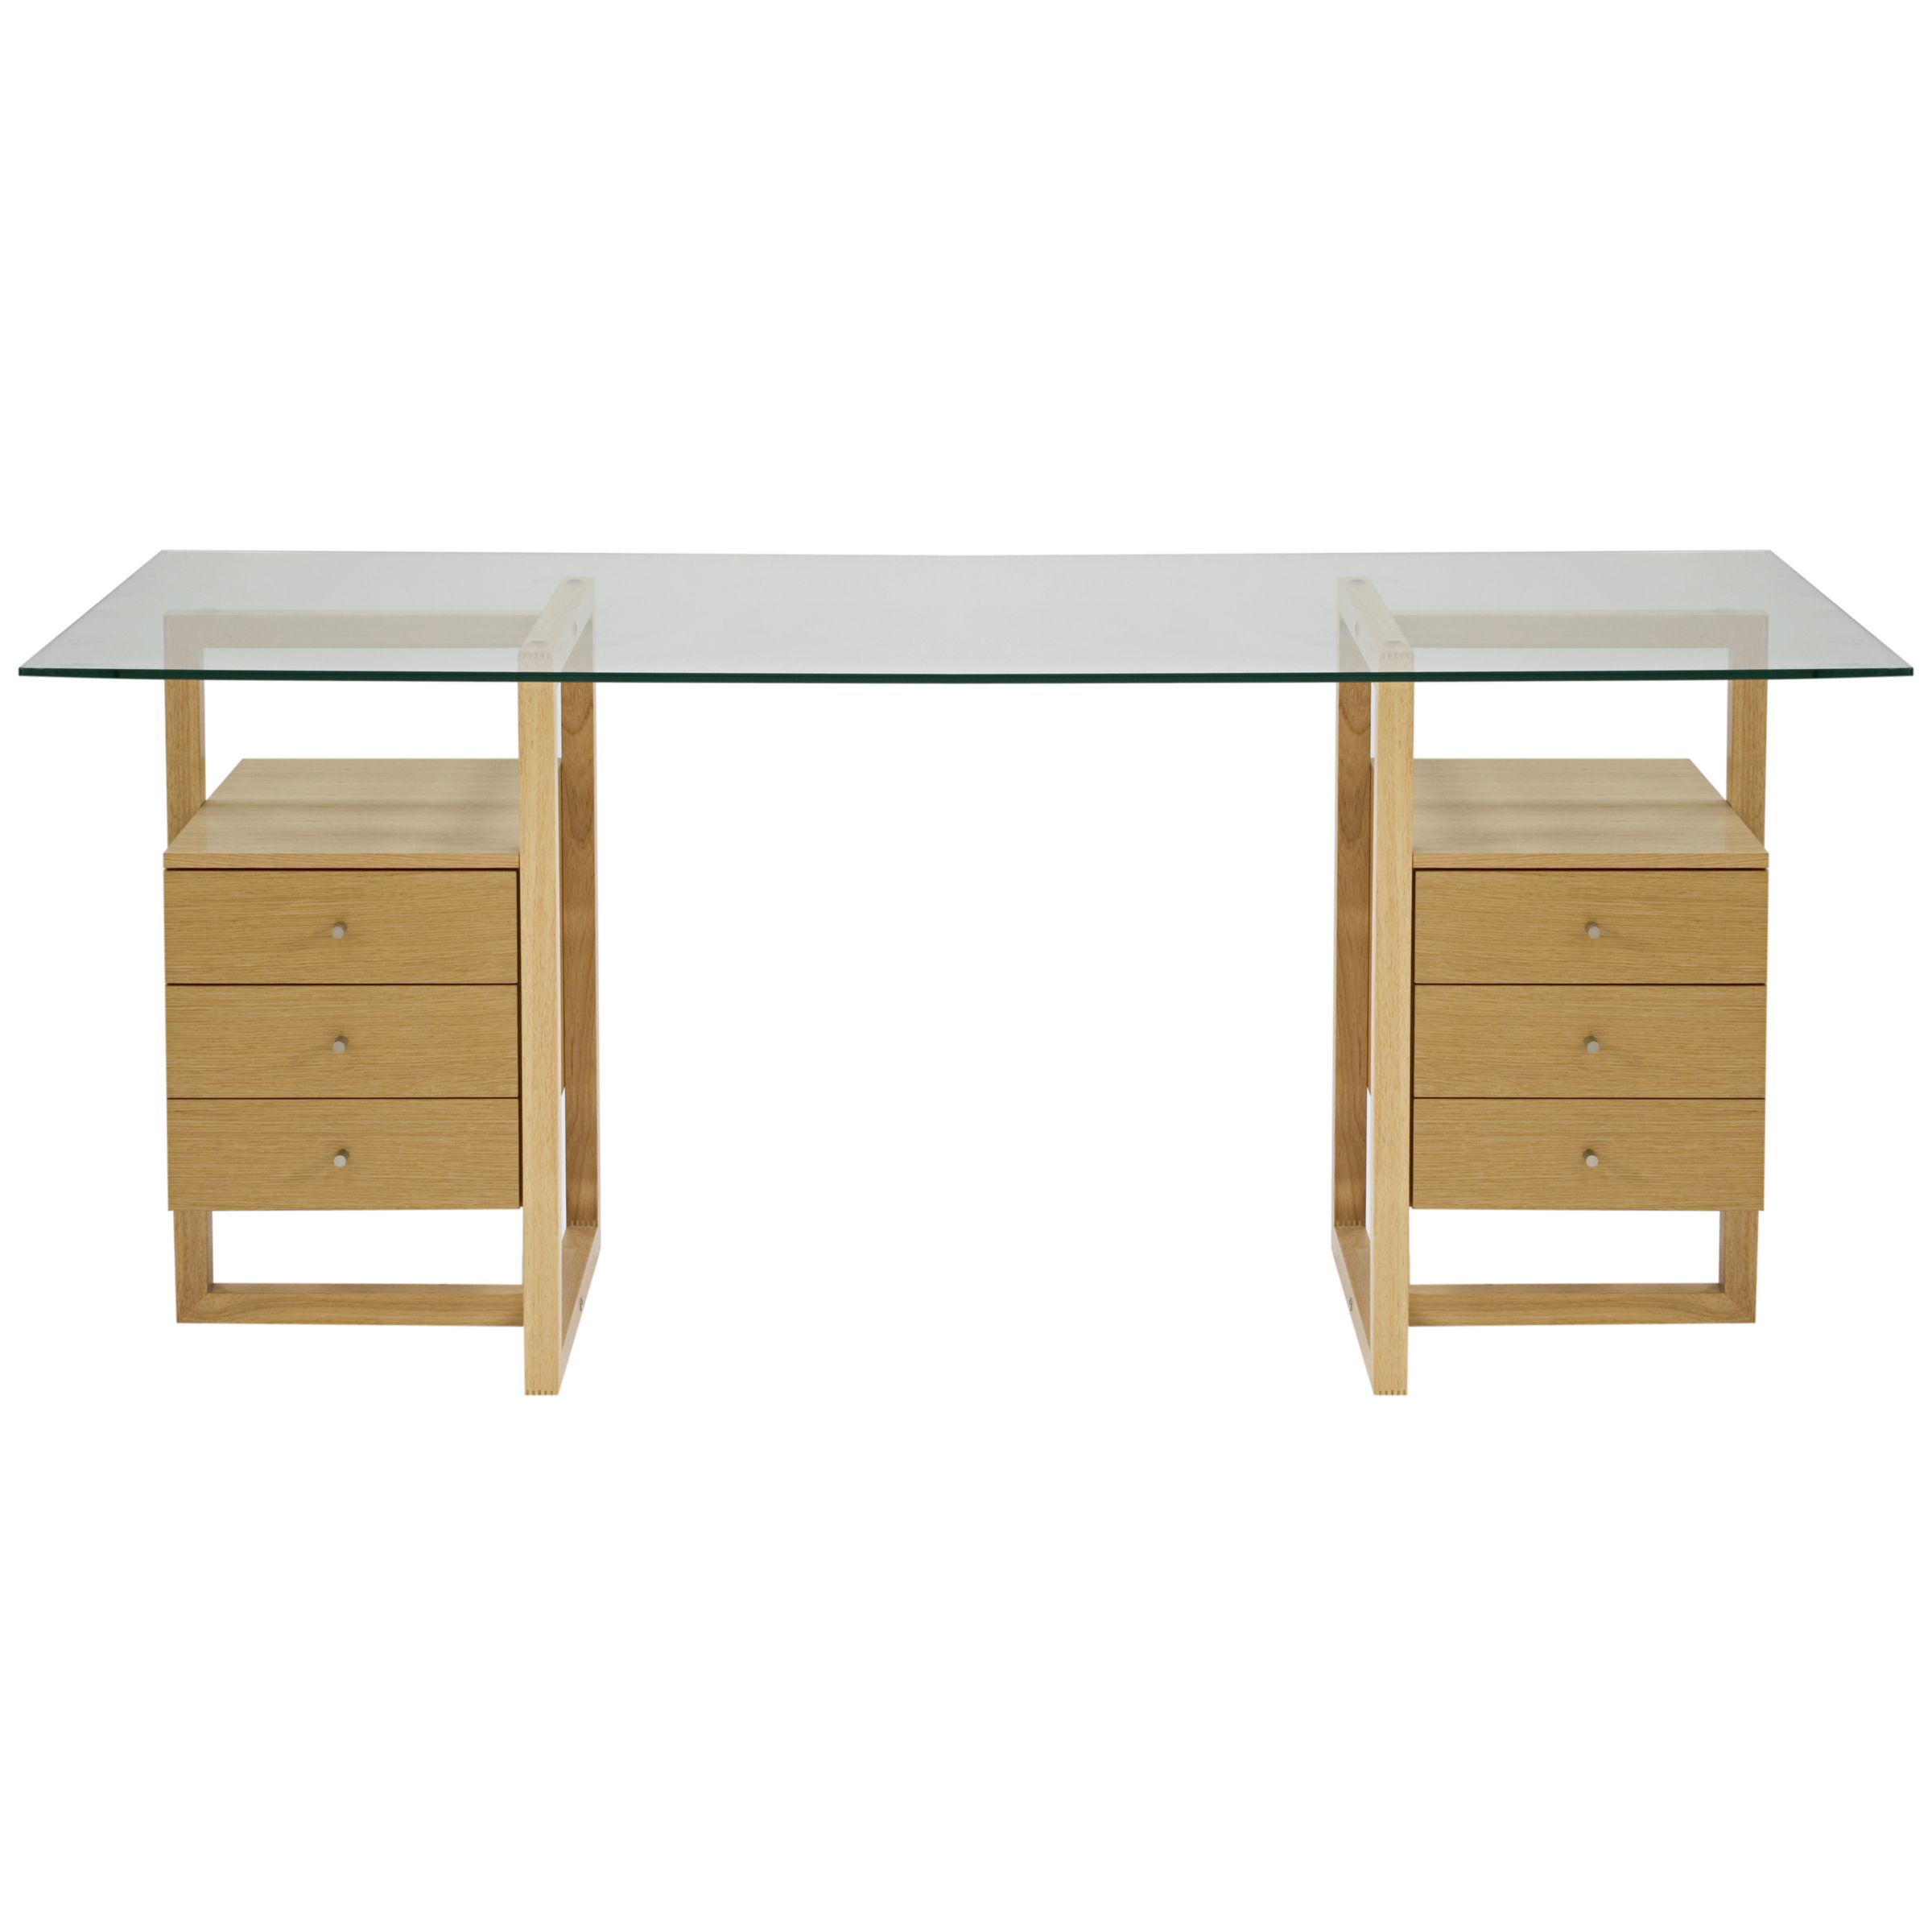 Staten Small Glass Desk with Oak Trestle and 2 Drawer Packs